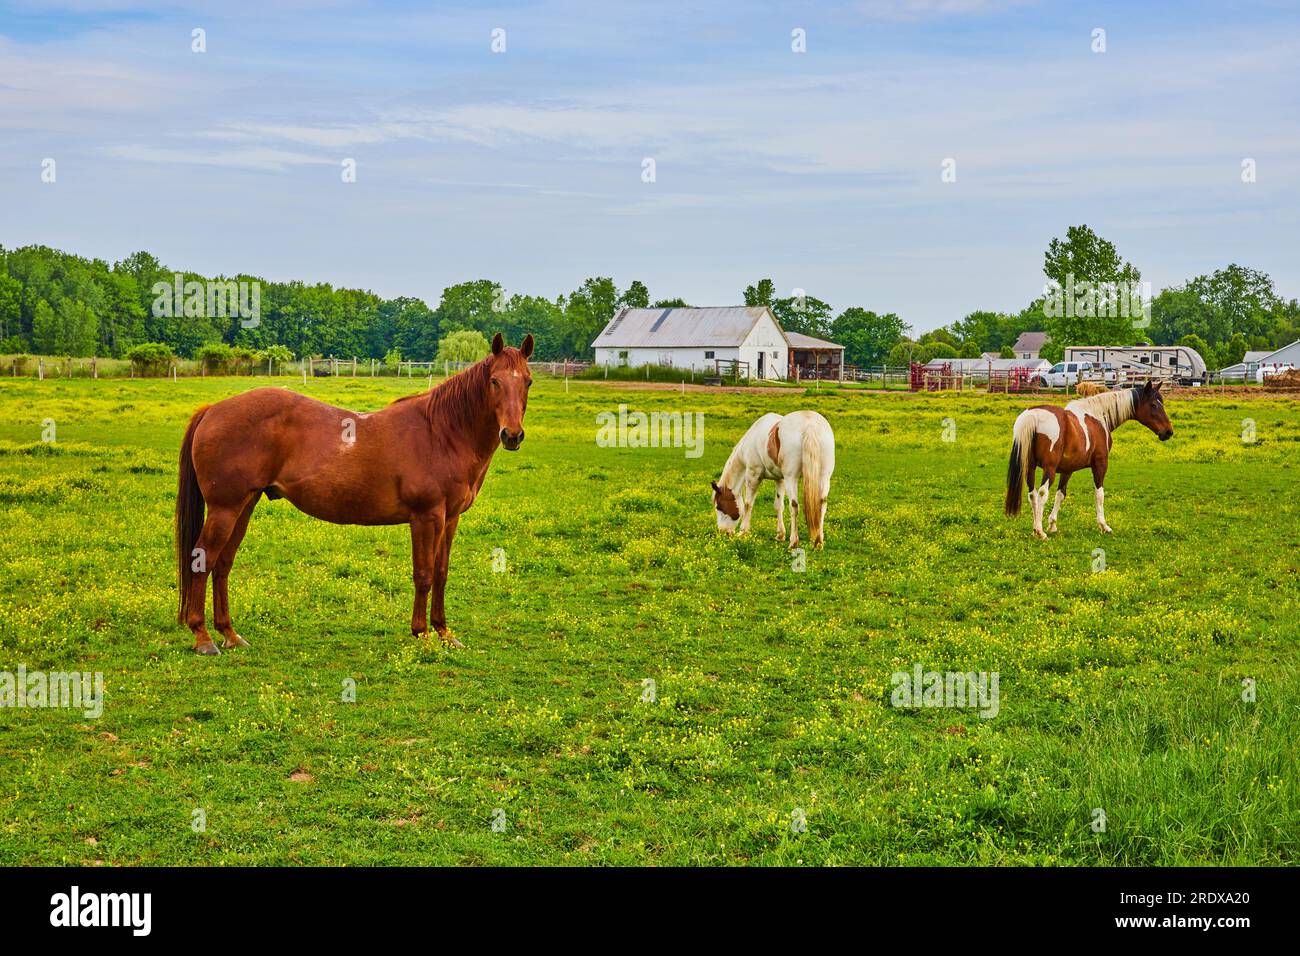 Paint horses and chestnut horse standing in green field near farmhouses and trailer Stock Photo